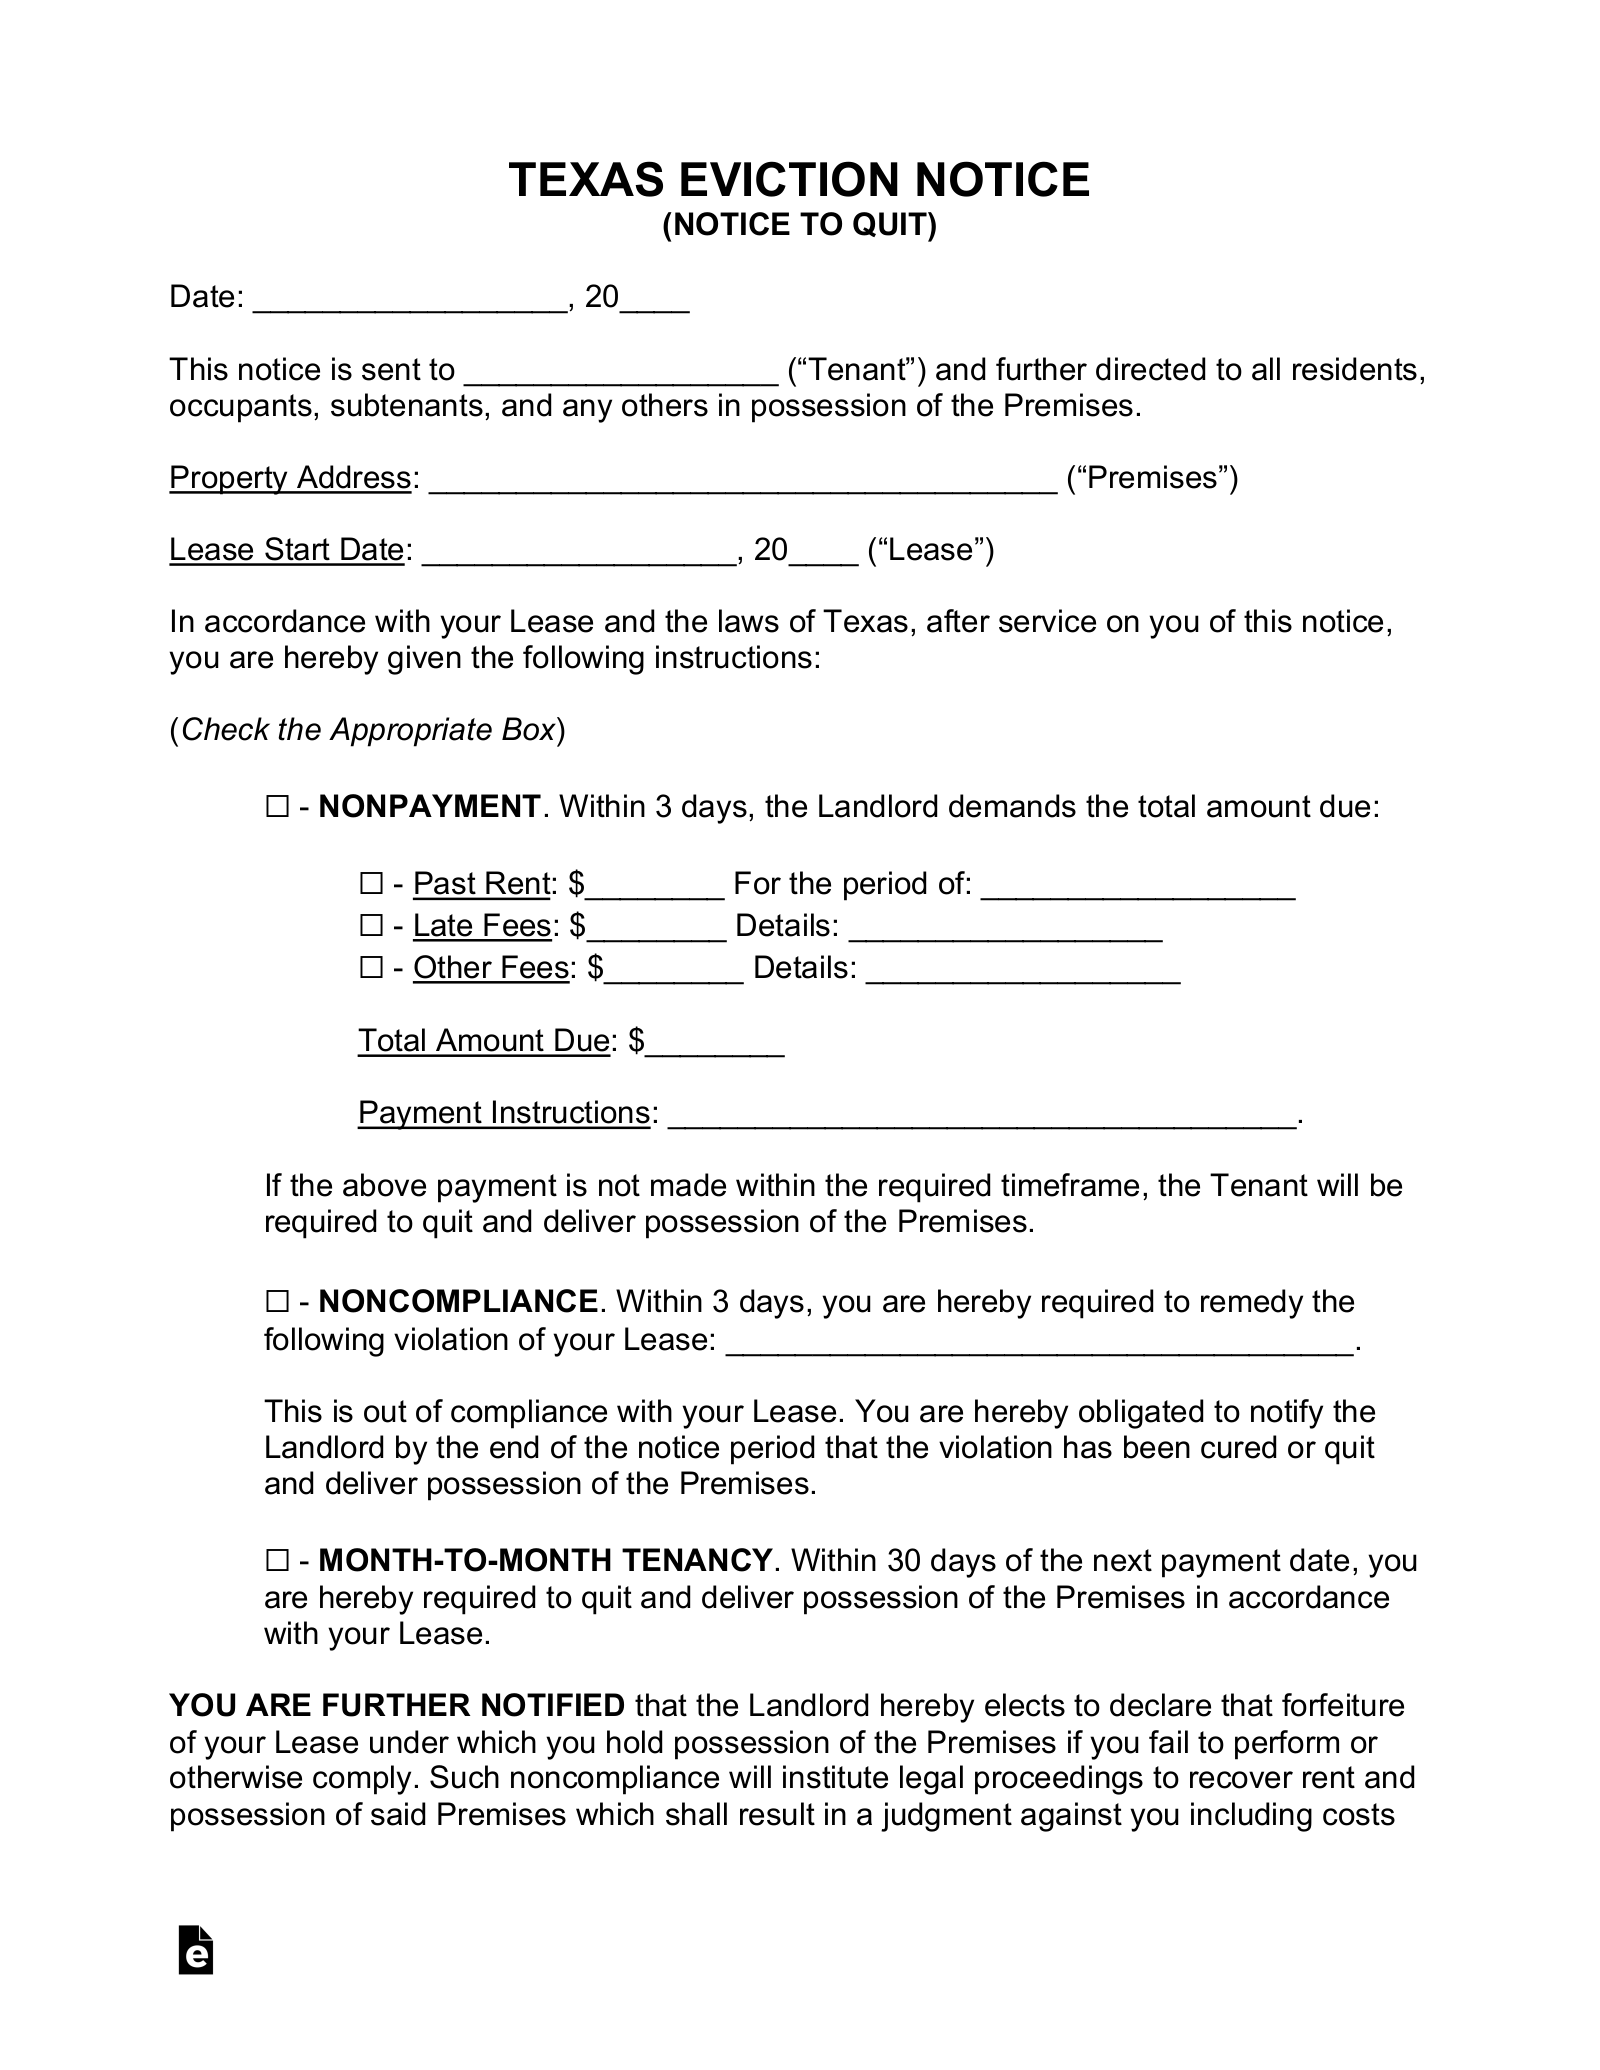 Tenant Eviction Letter Sample from eforms.com